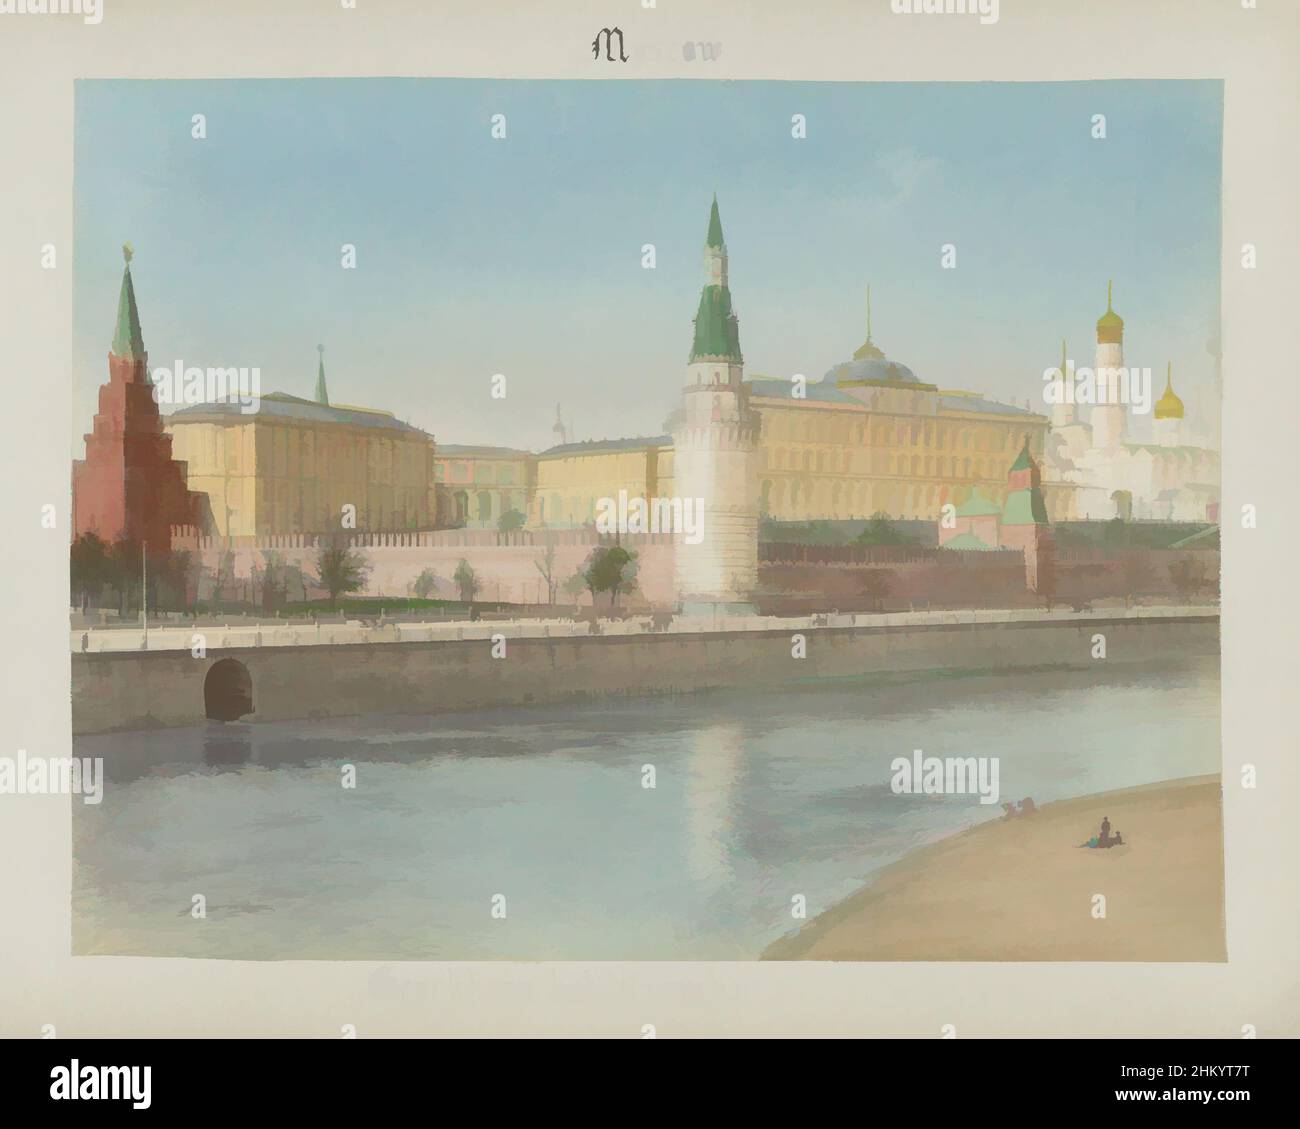 Art inspired by View of the Kremlin and Moskva River, Moscow, View of the Kremlin., A colored photograph of the Kremlin seen from the other side of the bridge over the Moskva., Henry Pauw van Wieldrecht, 1898, paper, albumen print, height 220 mm × width 275 mmheight 259 mm × width 365, Classic works modernized by Artotop with a splash of modernity. Shapes, color and value, eye-catching visual impact on art. Emotions through freedom of artworks in a contemporary way. A timeless message pursuing a wildly creative new direction. Artists turning to the digital medium and creating the Artotop NFT Stock Photo